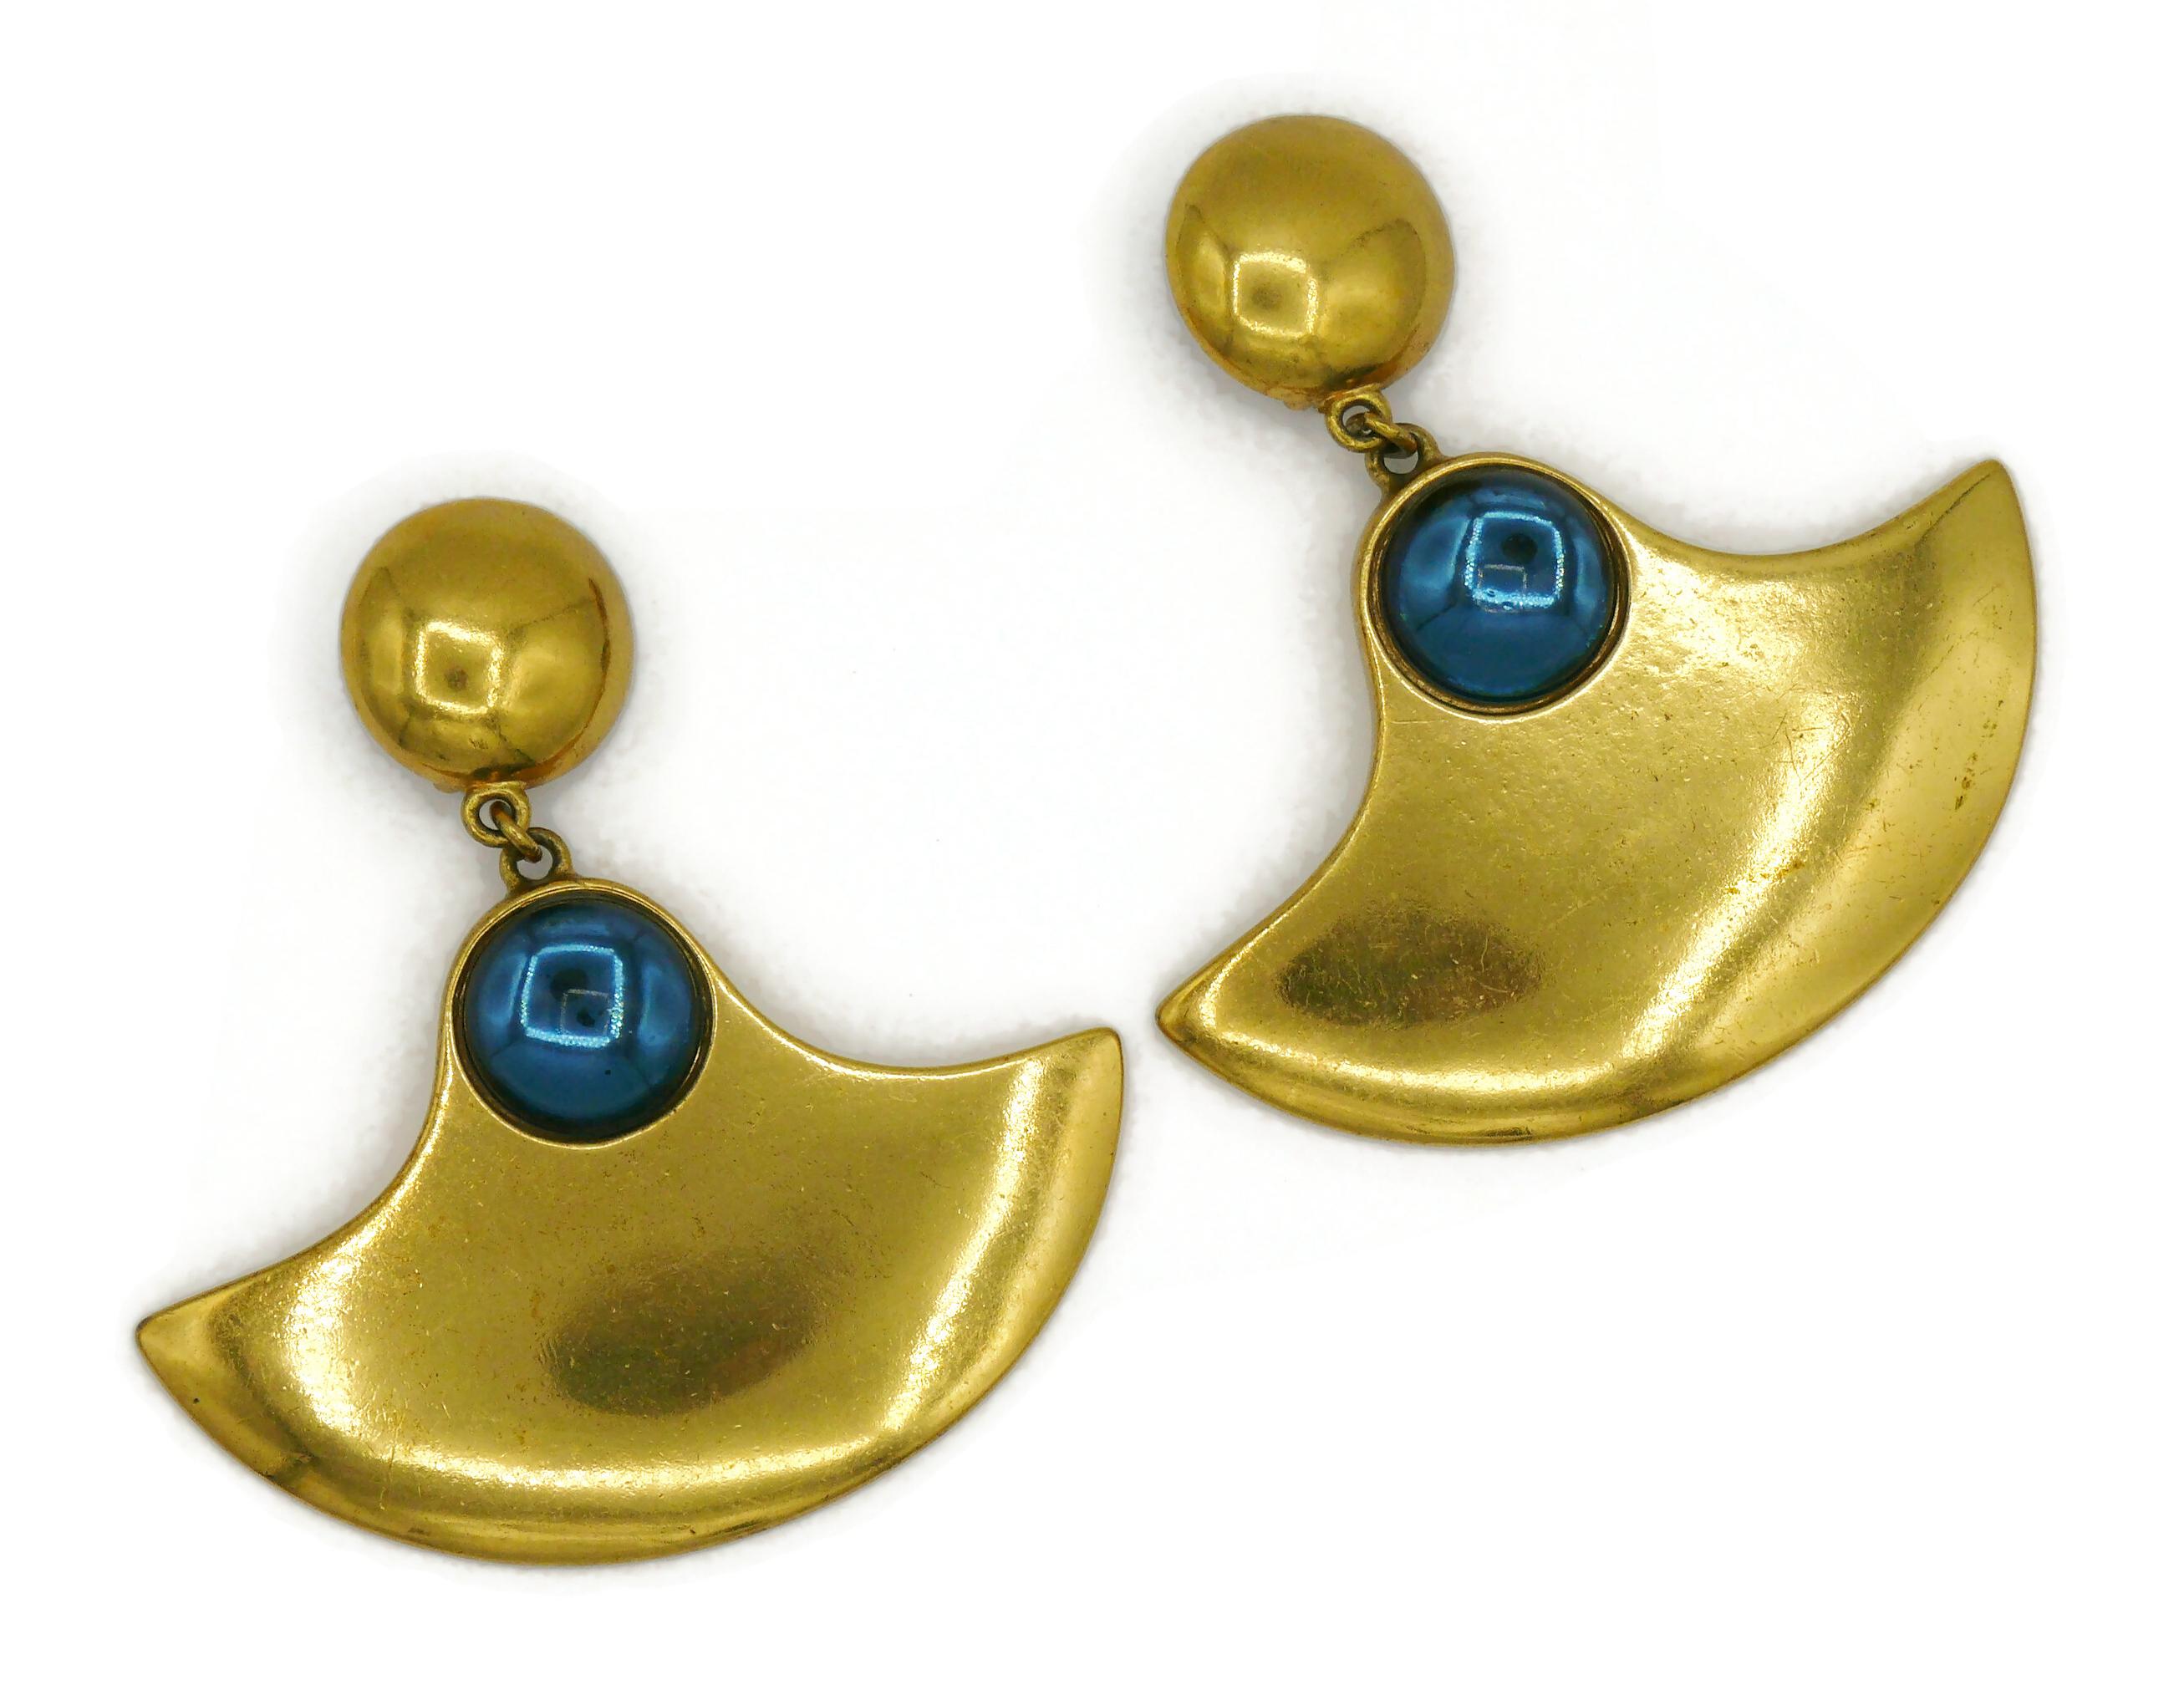 YVES SAINT LAURENT oversized vintage fan shaped gold tone dangling earrings (clip-on) embellished with a blue glass cabochon.

Embossed YSL Made in France.

Indicative measurements : height approx. 8.3 cm (3.27 inches) / max. width approx. 7.8 cm